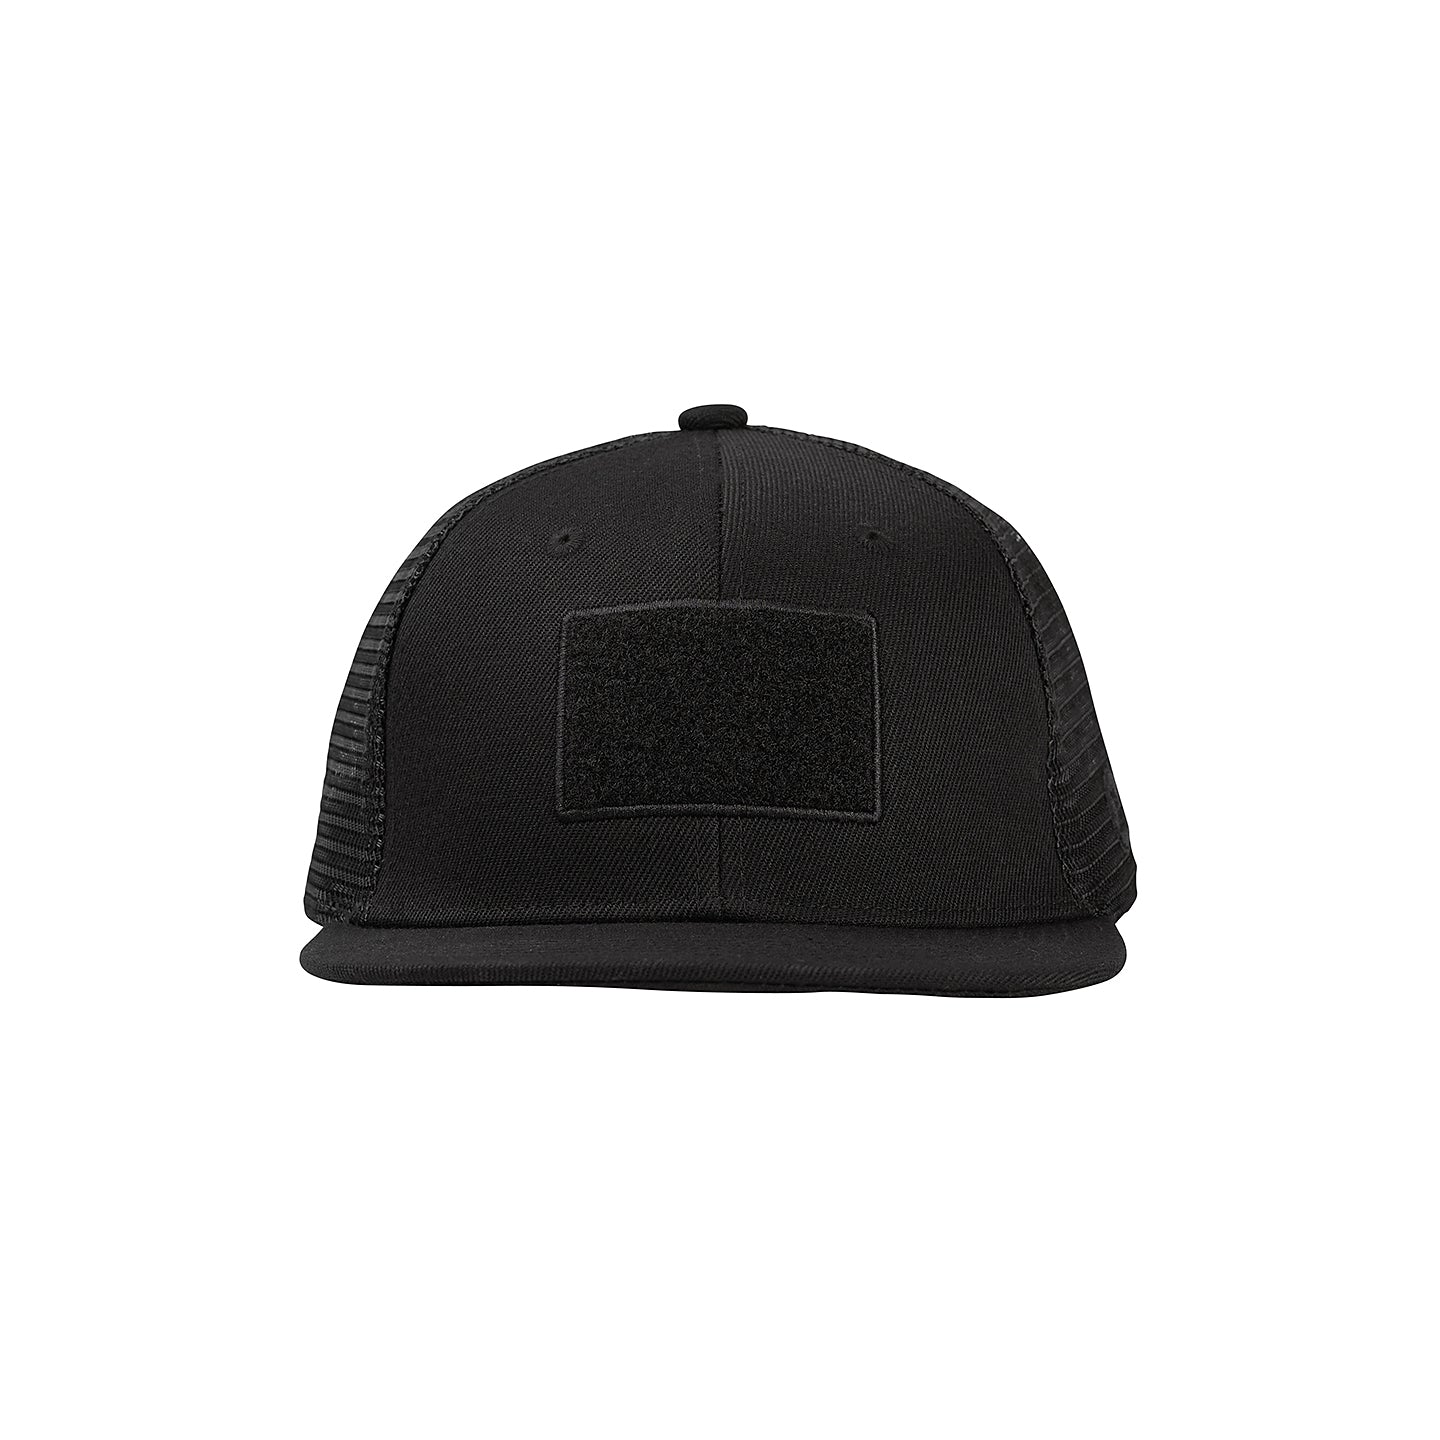 Black Trucker Hat With LV Patch Adjustable Snapback New